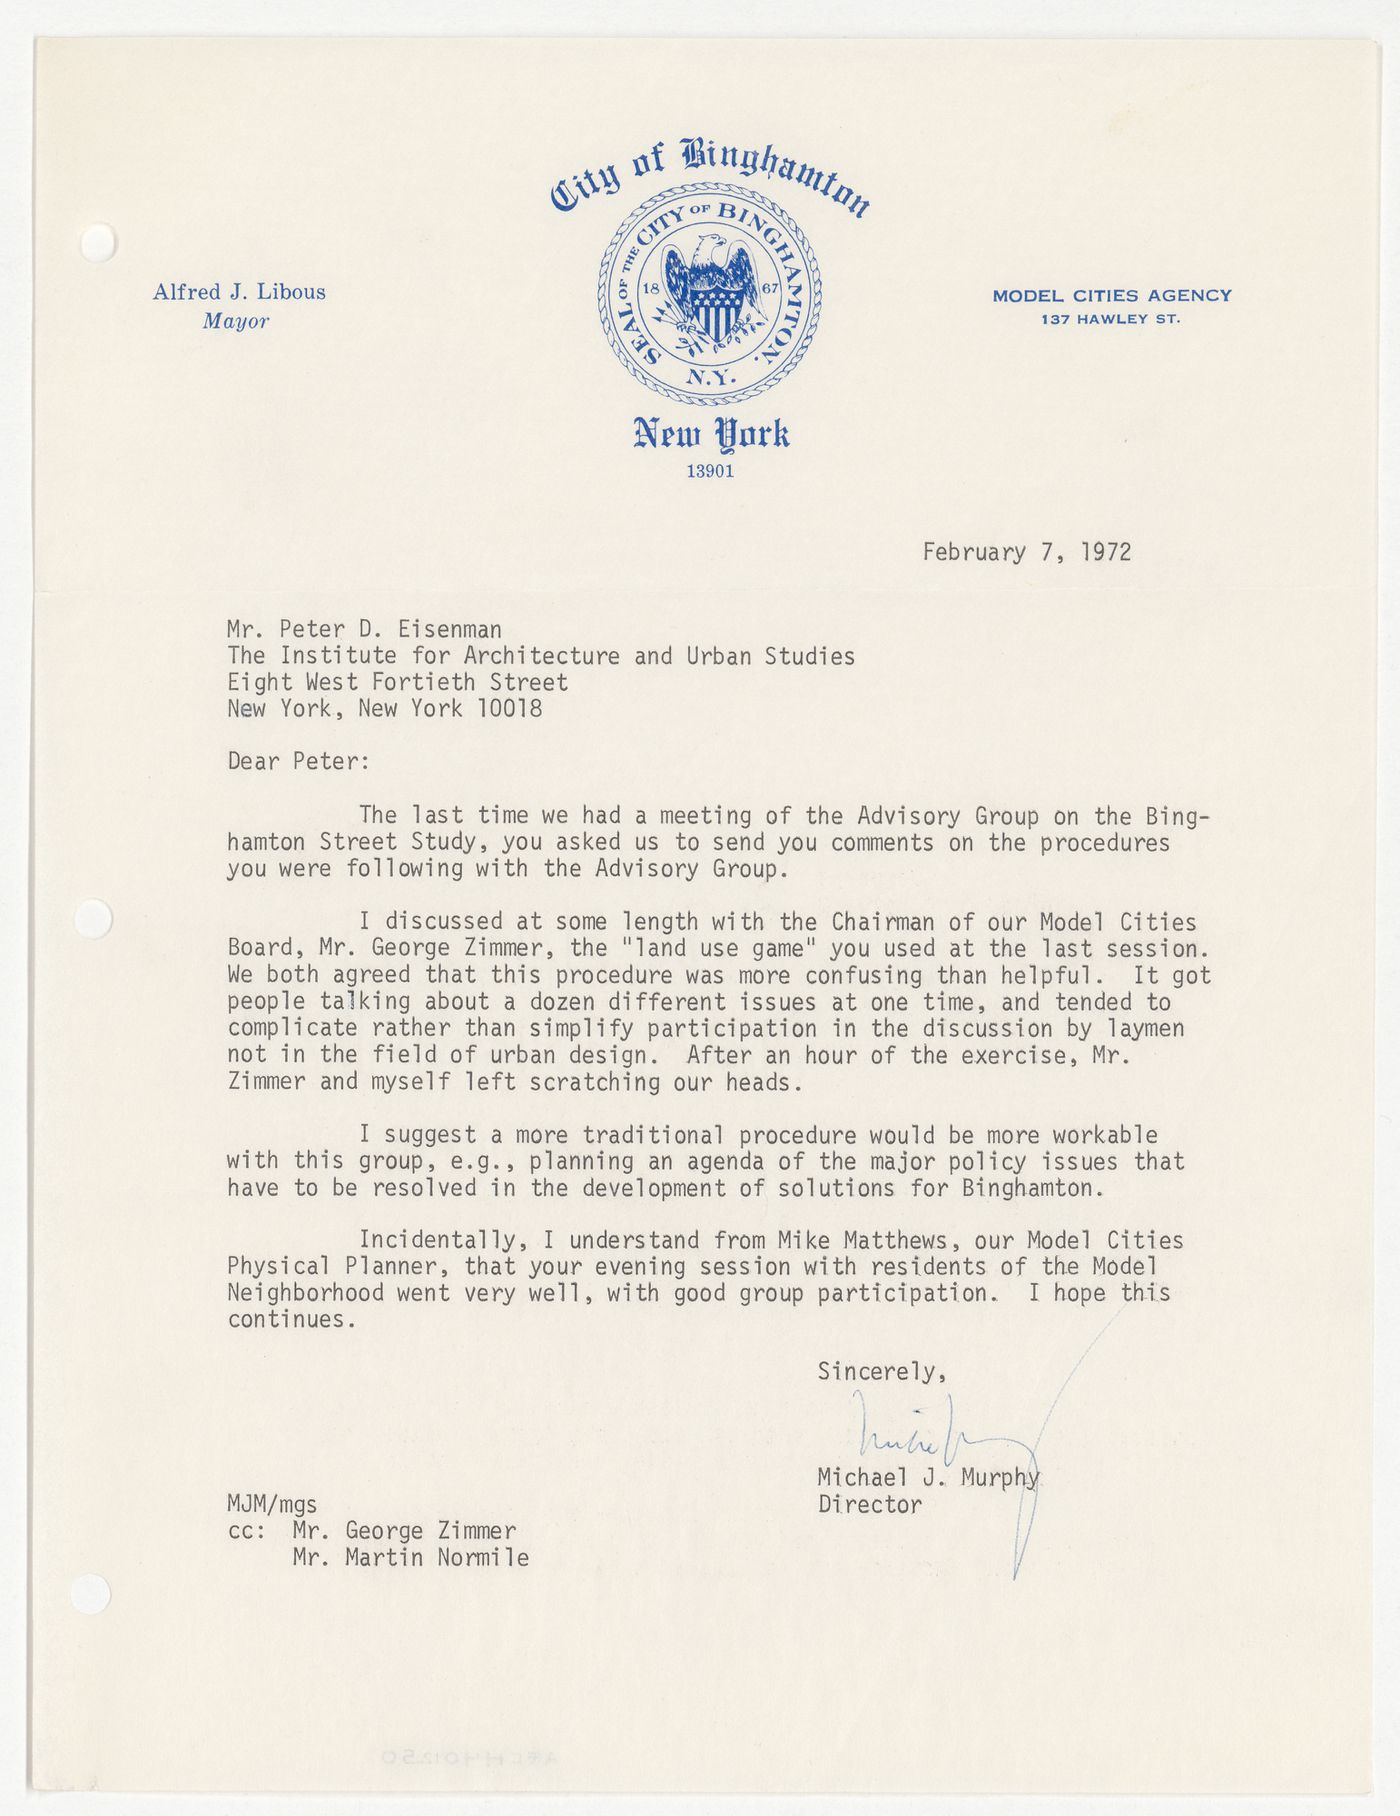 Letter from Michael J. Murphy to Peter D. Eisenman about a meeting of the Advisory Group on the Binghamton Street Study